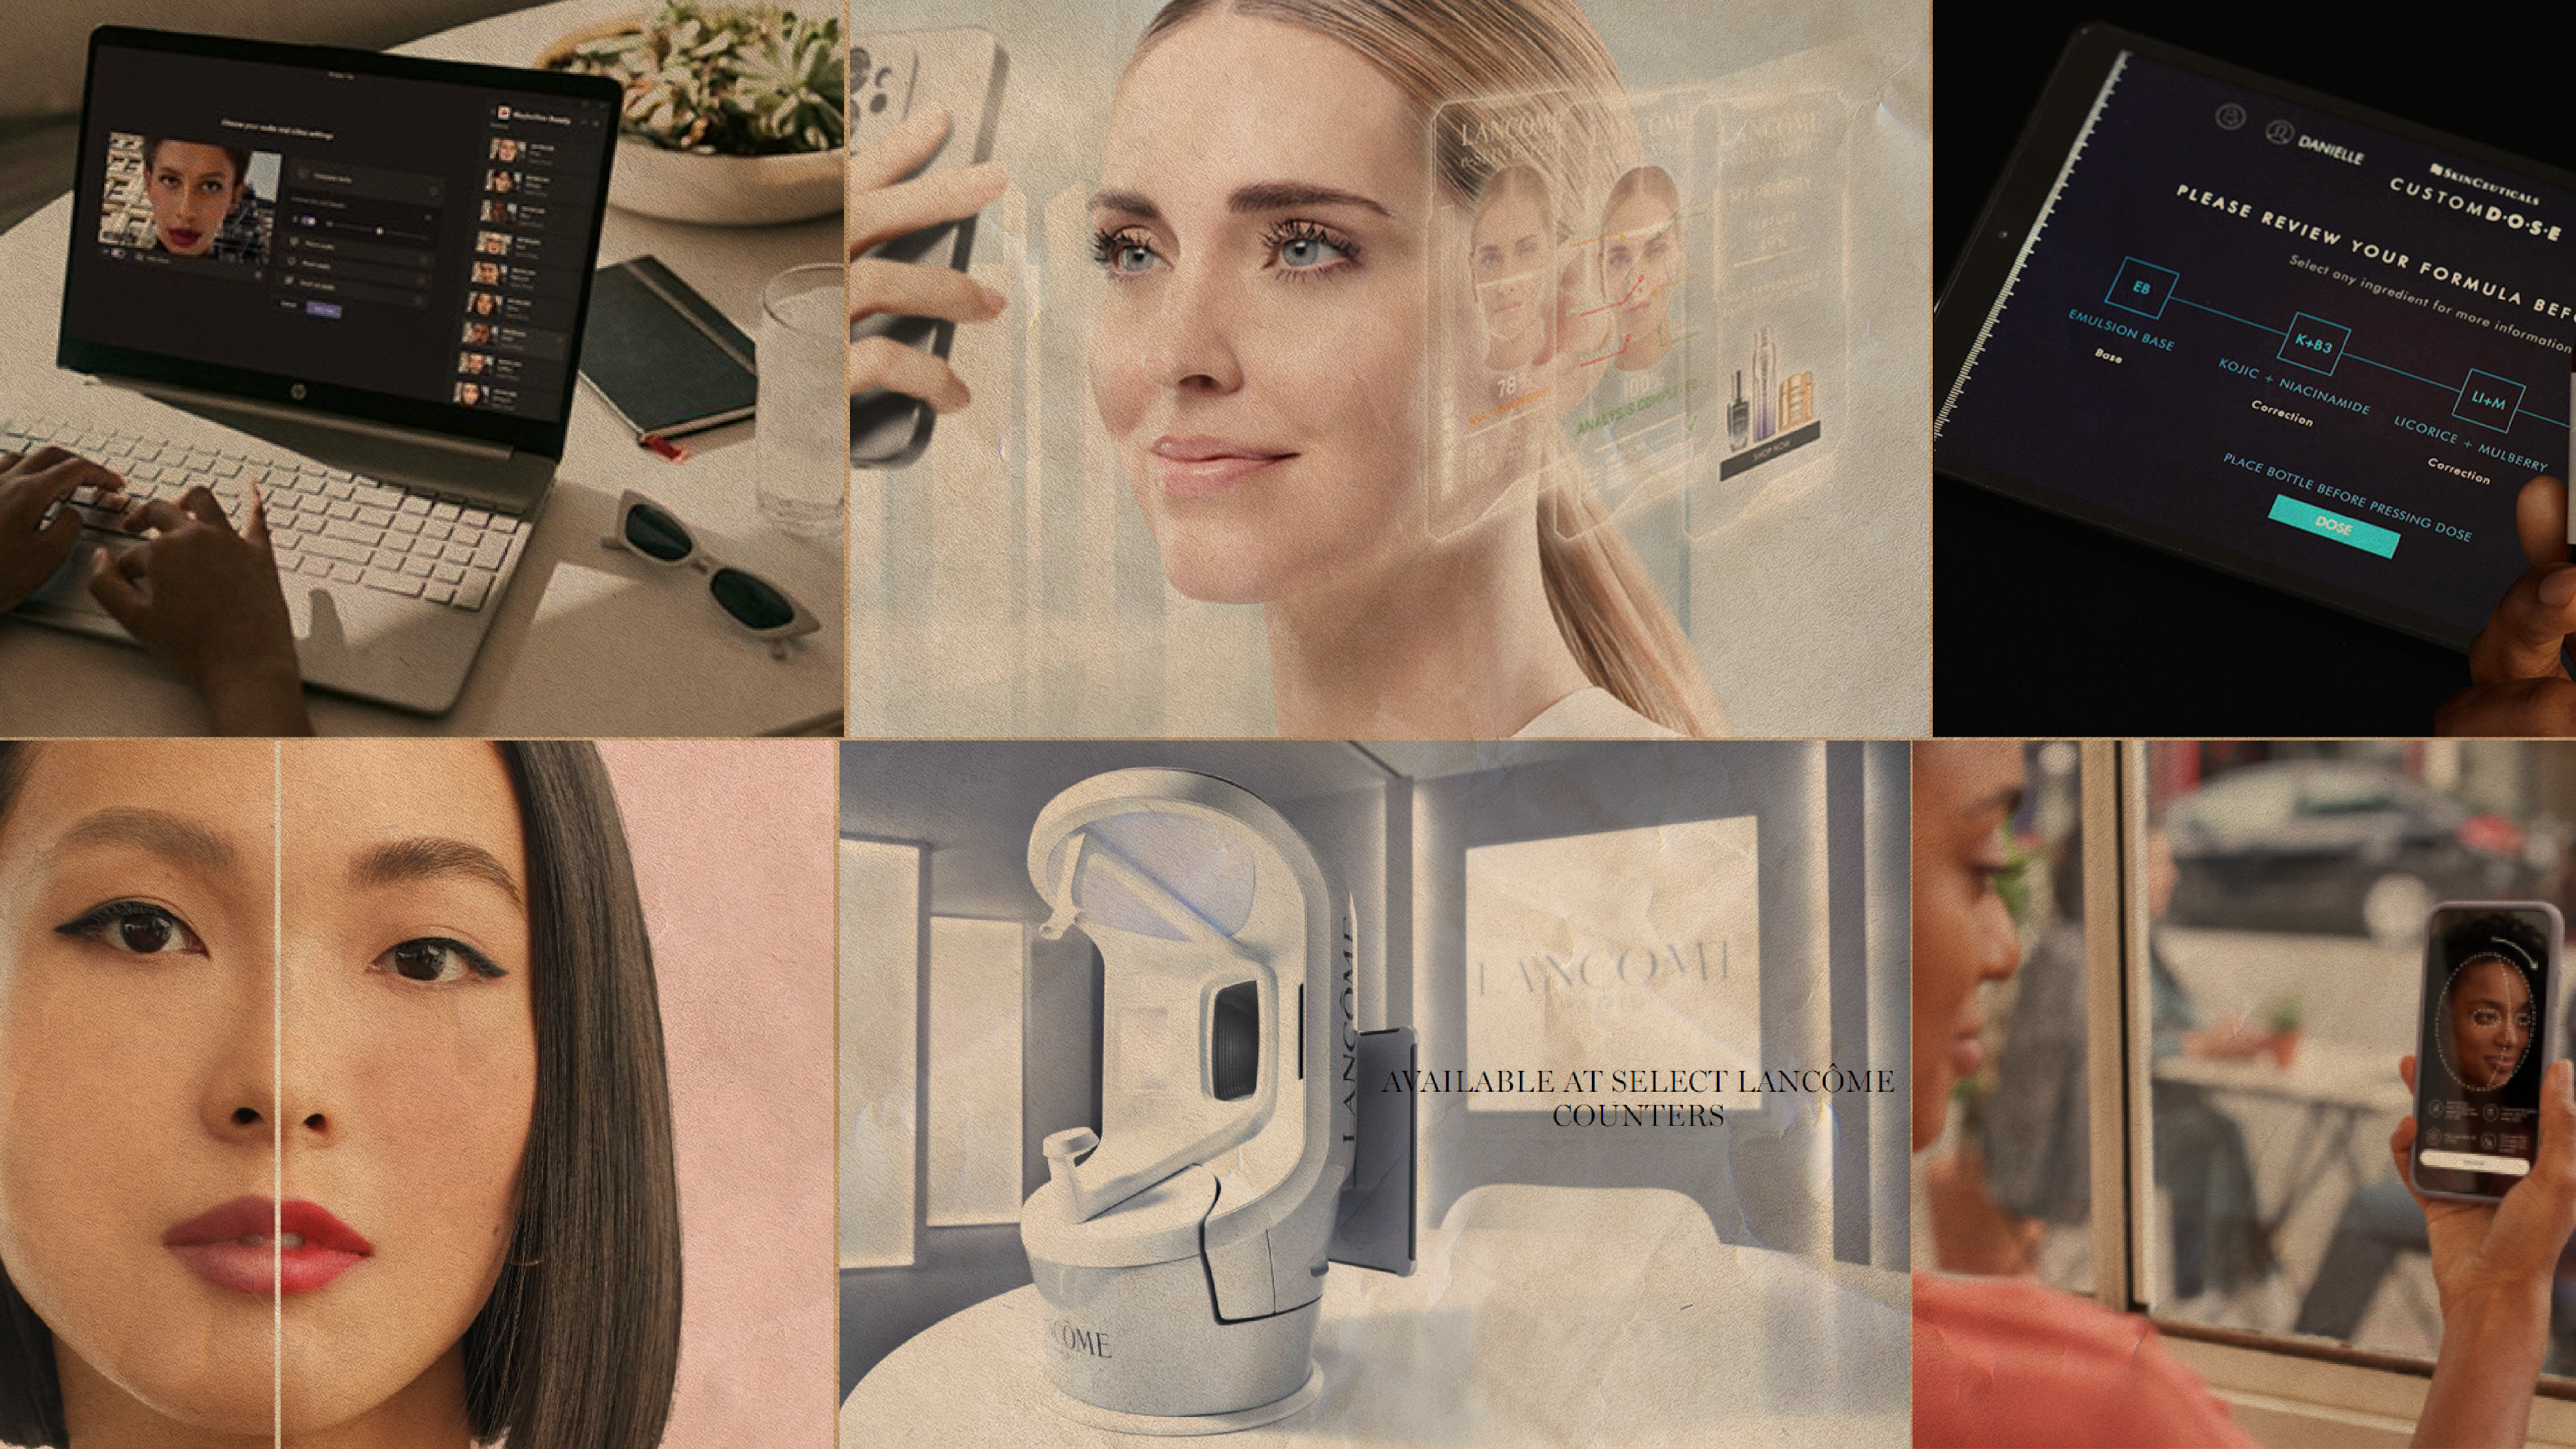 technological beauty: the personalized beauty revolution